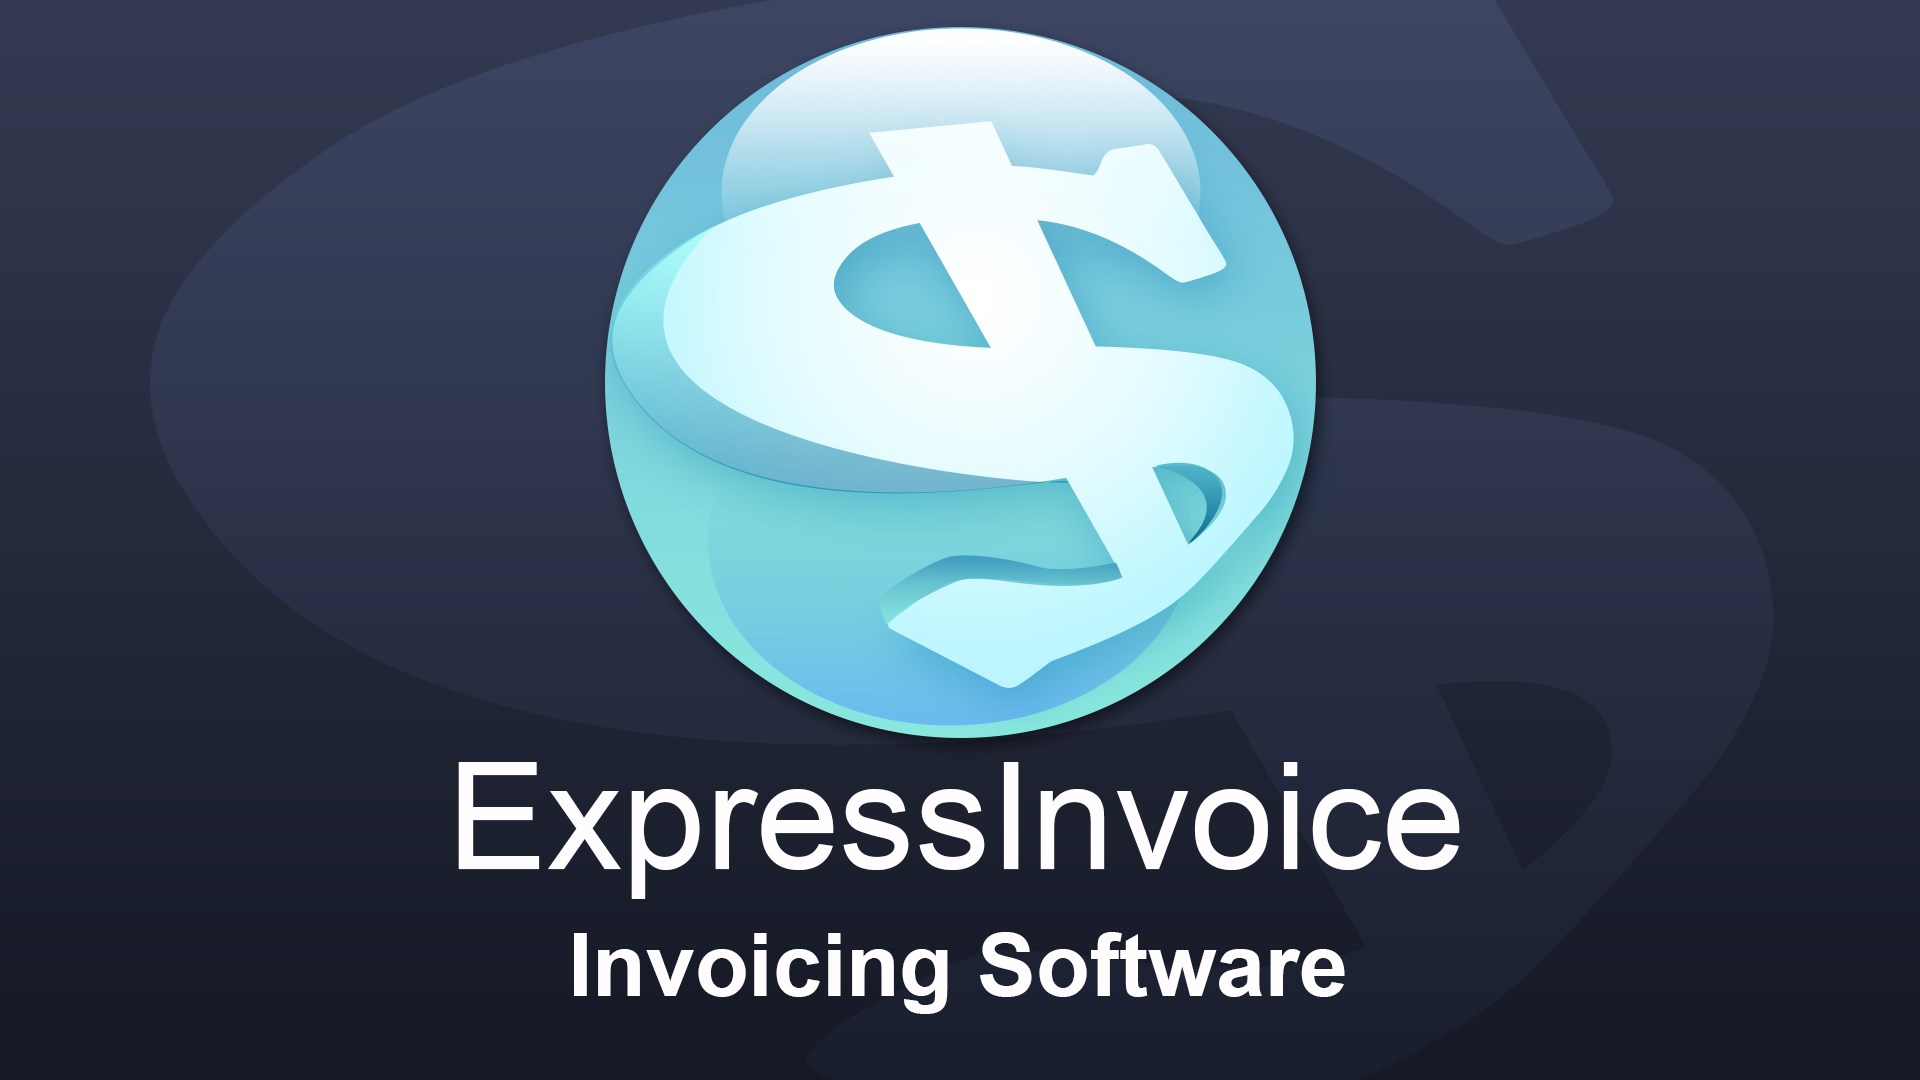 [$ 203.62] NCH: Express Invoice Invoicing Key